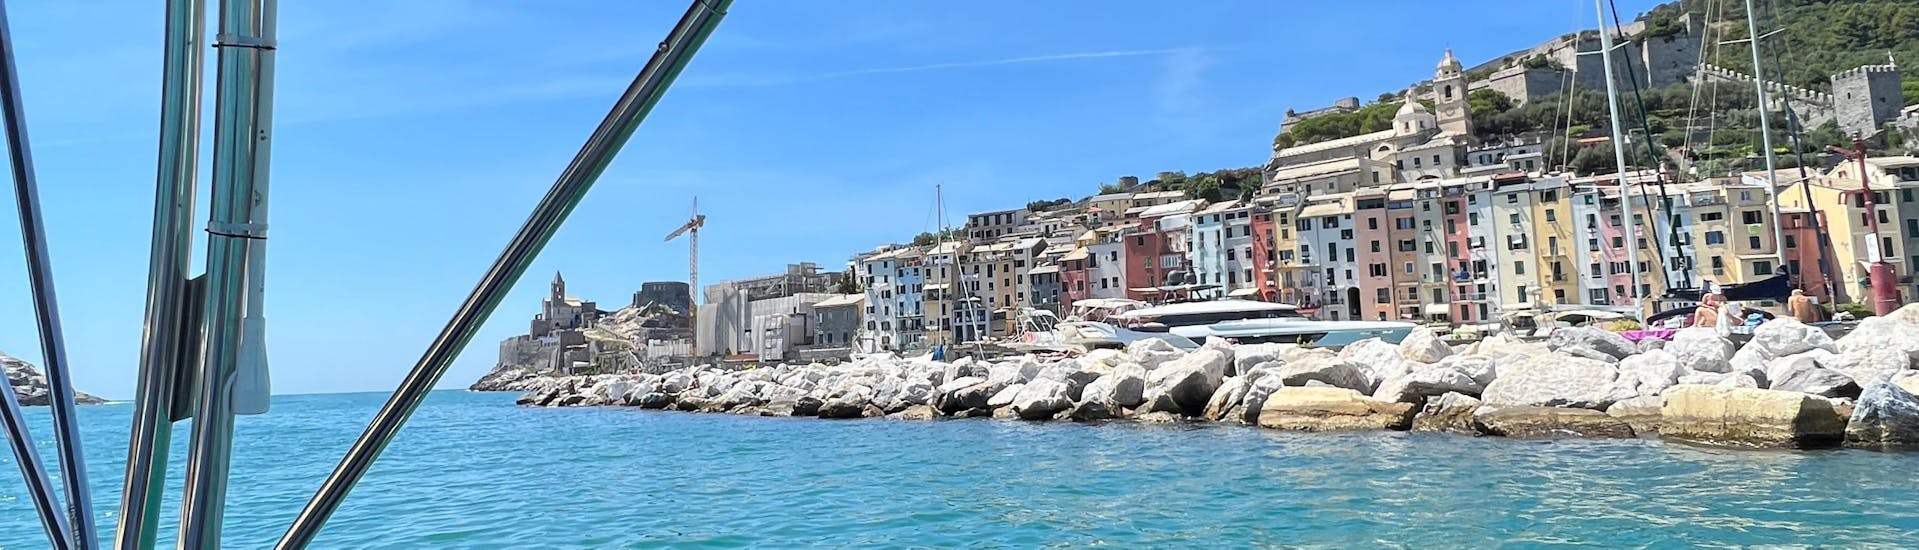 The view you will have during the Boat Trip from La Spezia with Stop in Monterosso or Vernazza & Swimming Stops with Maestrale Boat Tour Cinque Terre.